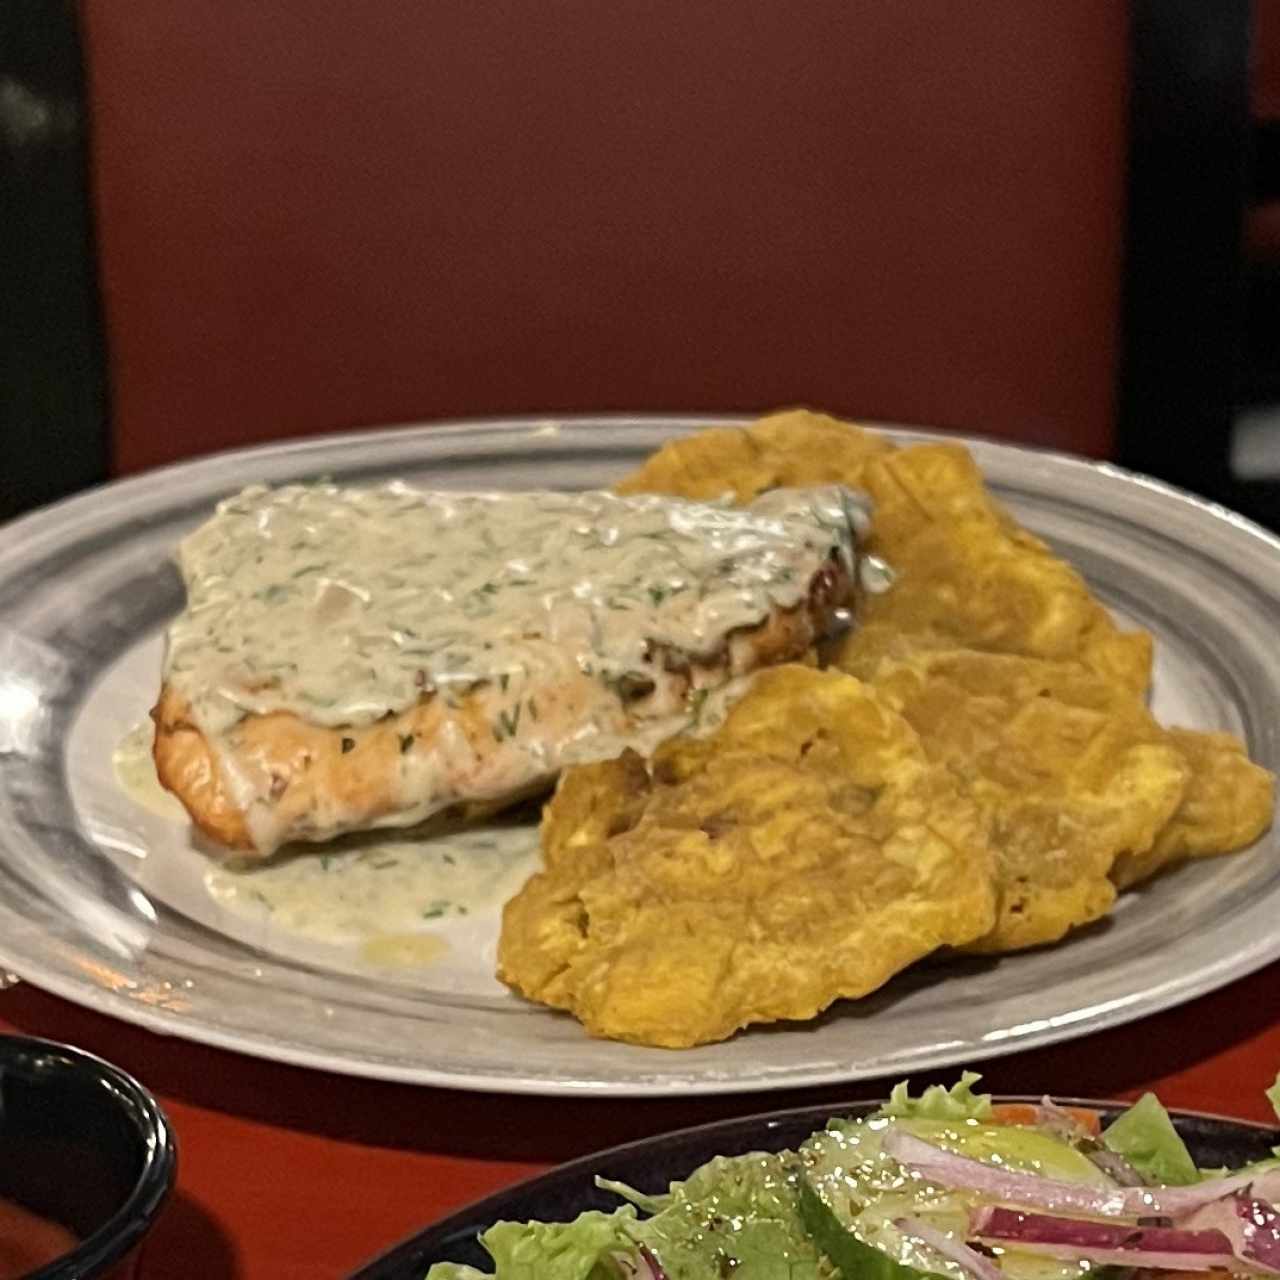 Salmon Fillet in Citrus Sauce with Fried Plantain Chips